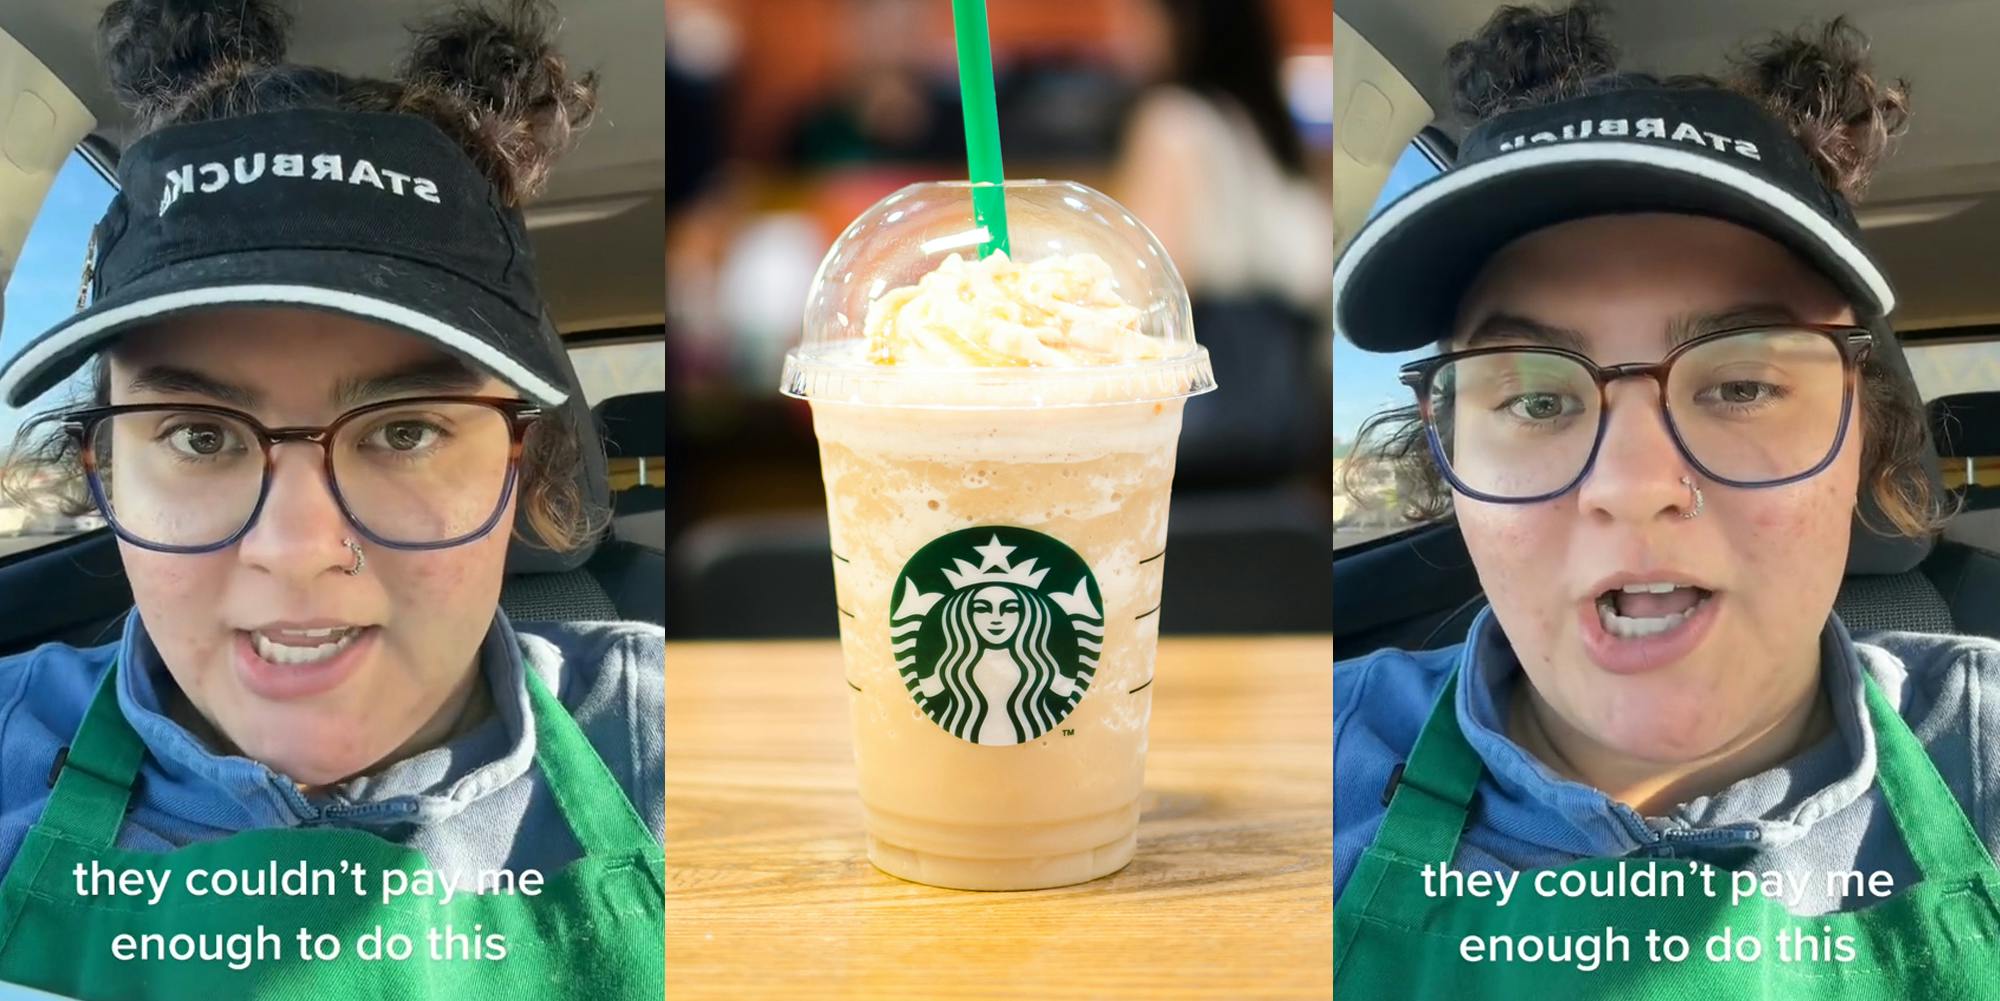 Starbucks barista speaking in car with caption "they couldn't pay me enough to do this" (l) Starbucks Frappuccino drink on wooden table (c) Starbucks barista speaking in car with caption "they couldn't pay me enough to do this" (r)